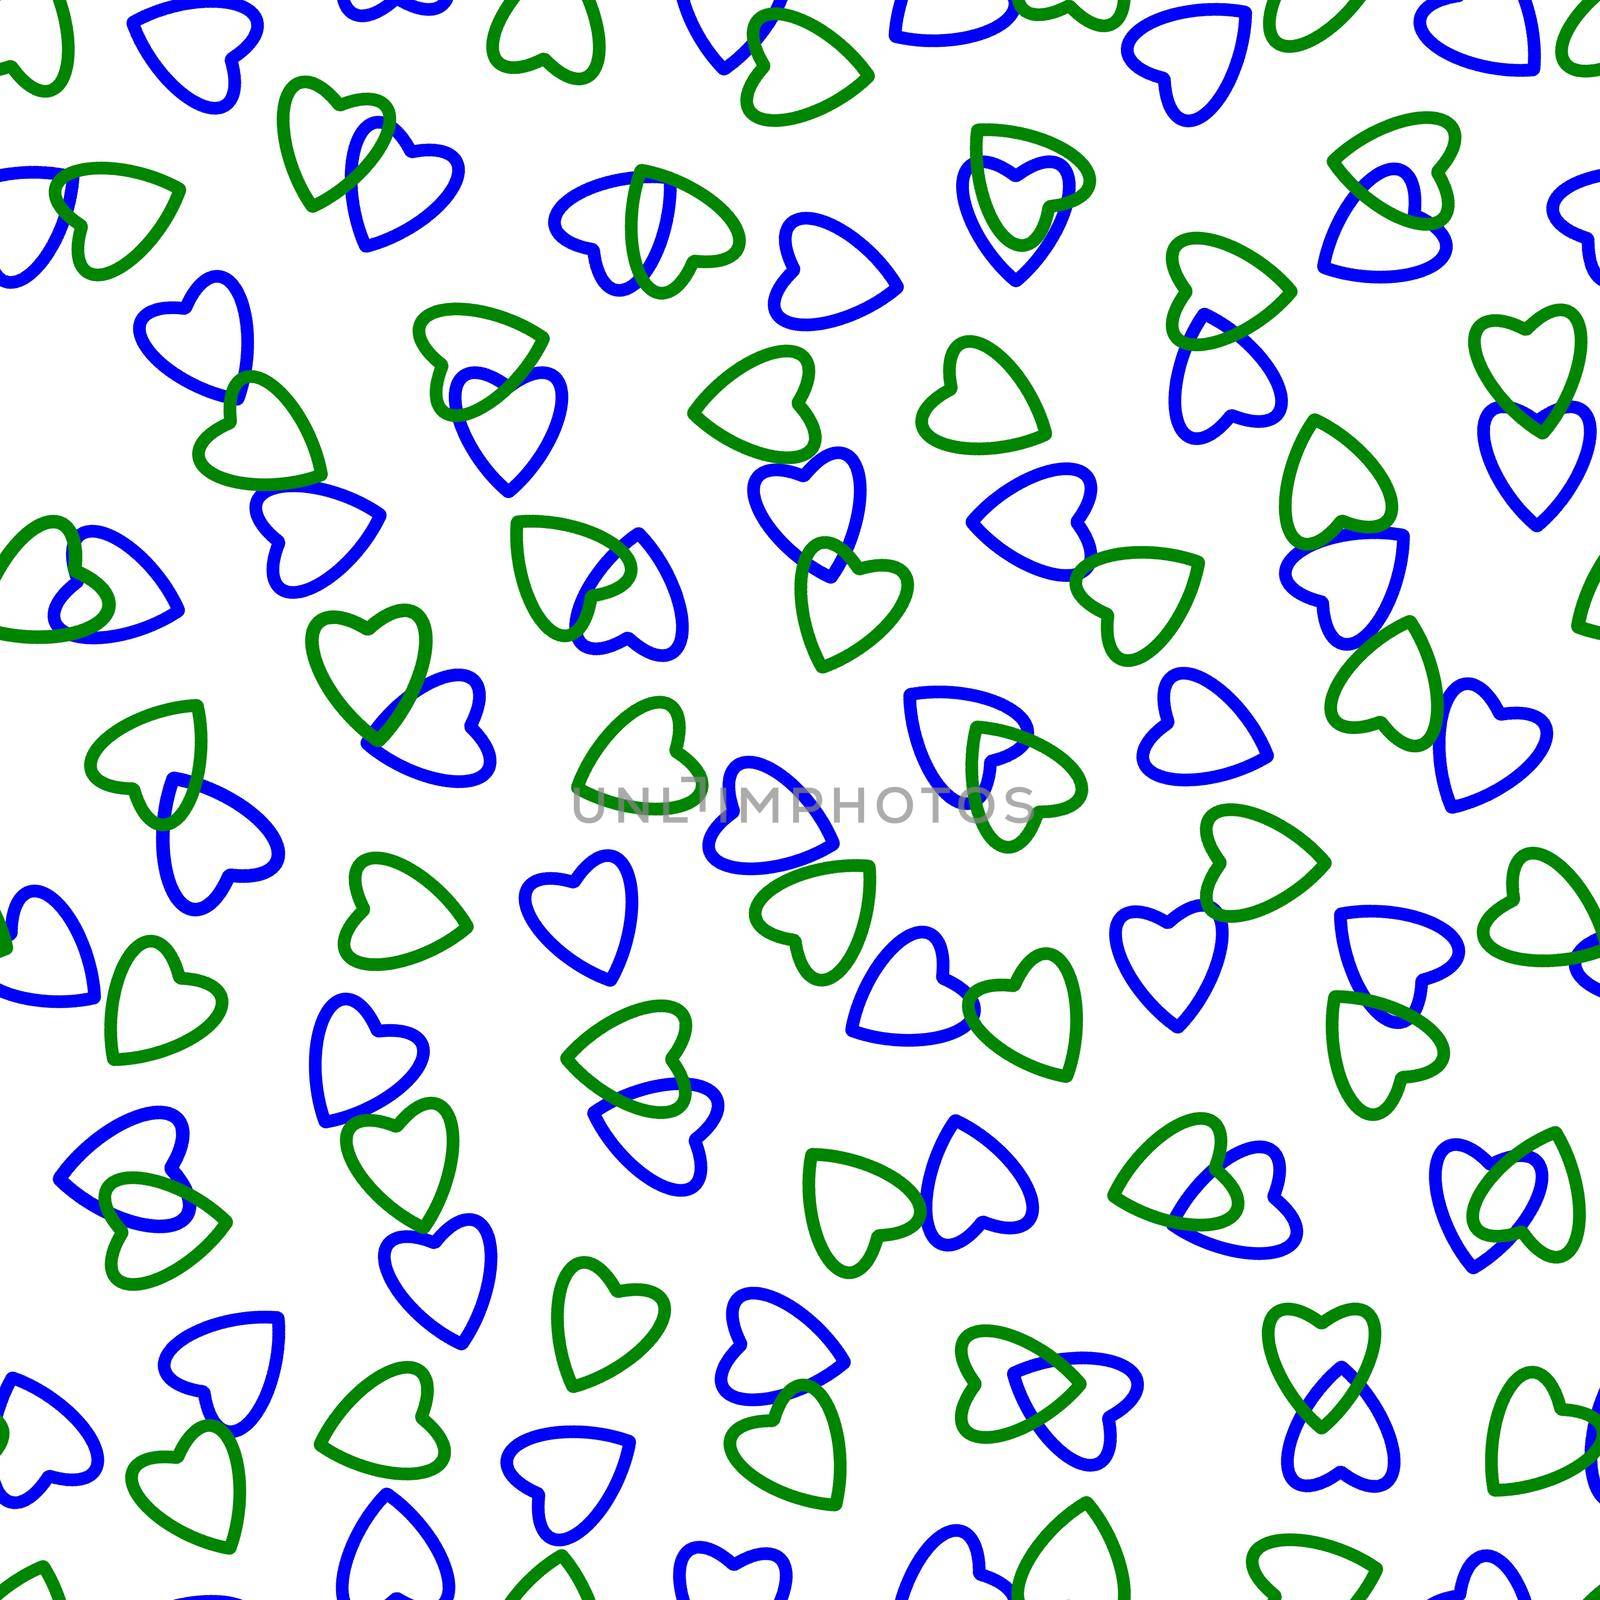 Simple hearts seamless pattern,endless chaotic texture made of tiny heart silhouettes.Valentines,mothers day background.Blue,green,white.Great for Easter,wedding,scrapbook,gift wrapping paper,textiles